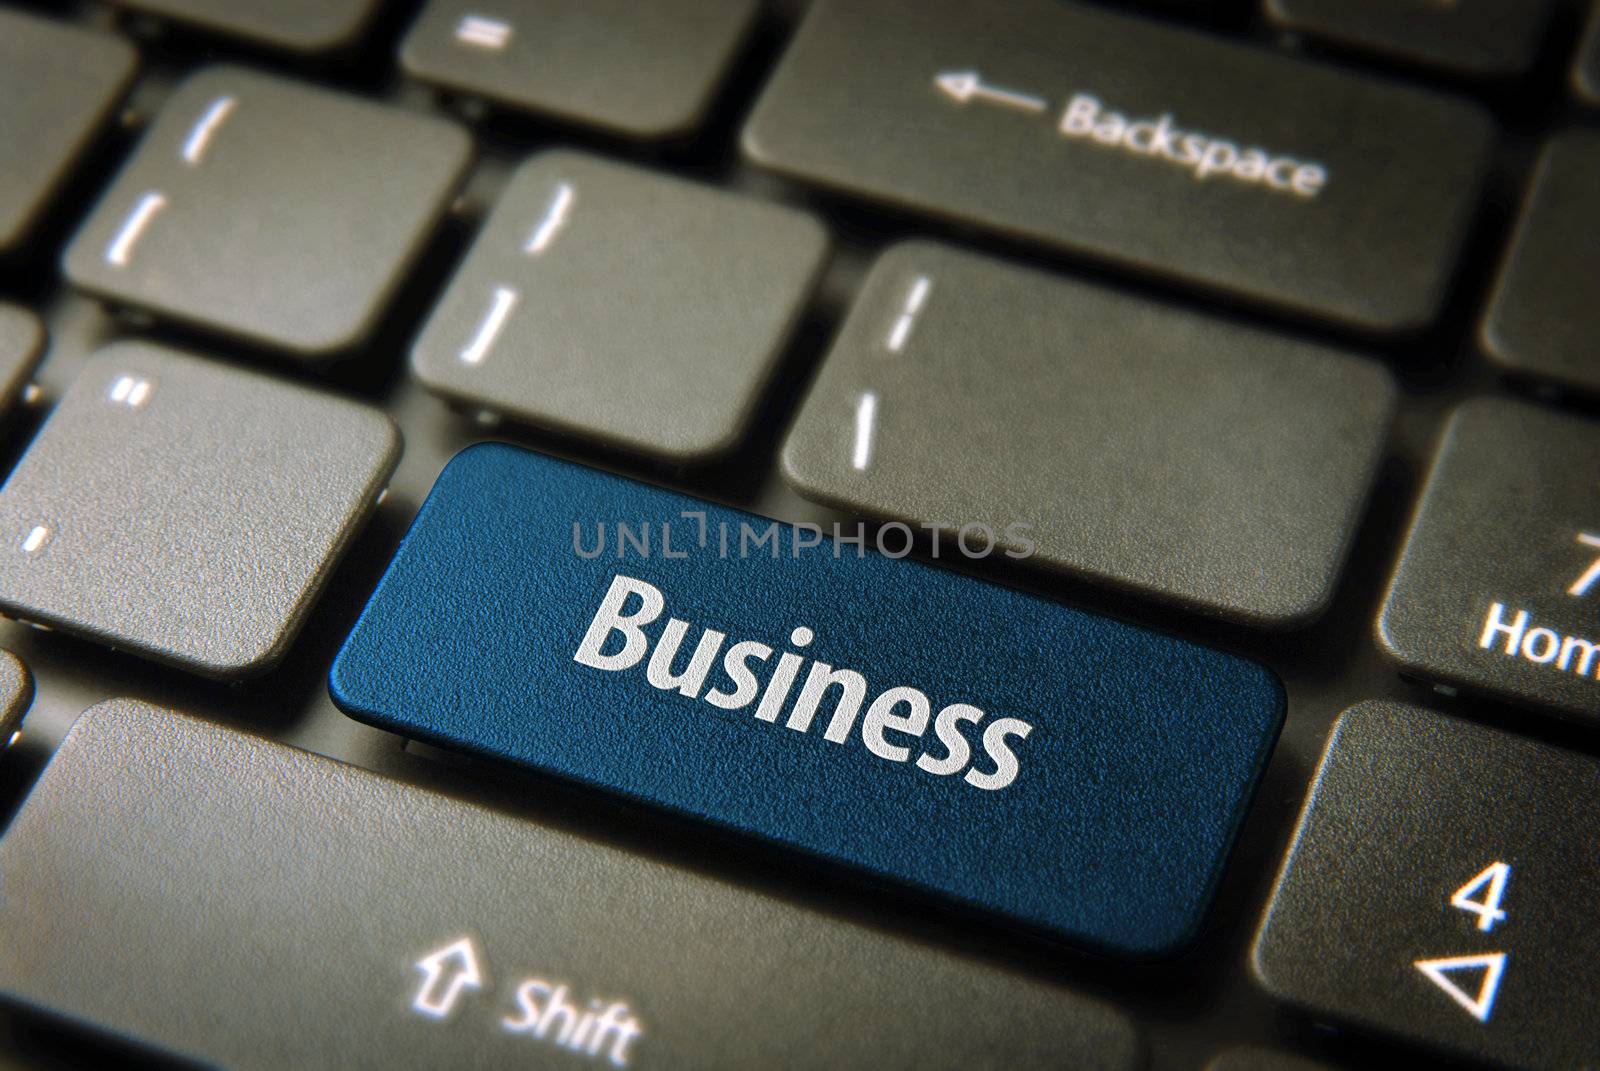 Expand your company with internet: blue key with business word on laptop keyboard. Included clipping path, so you can easily edit it.